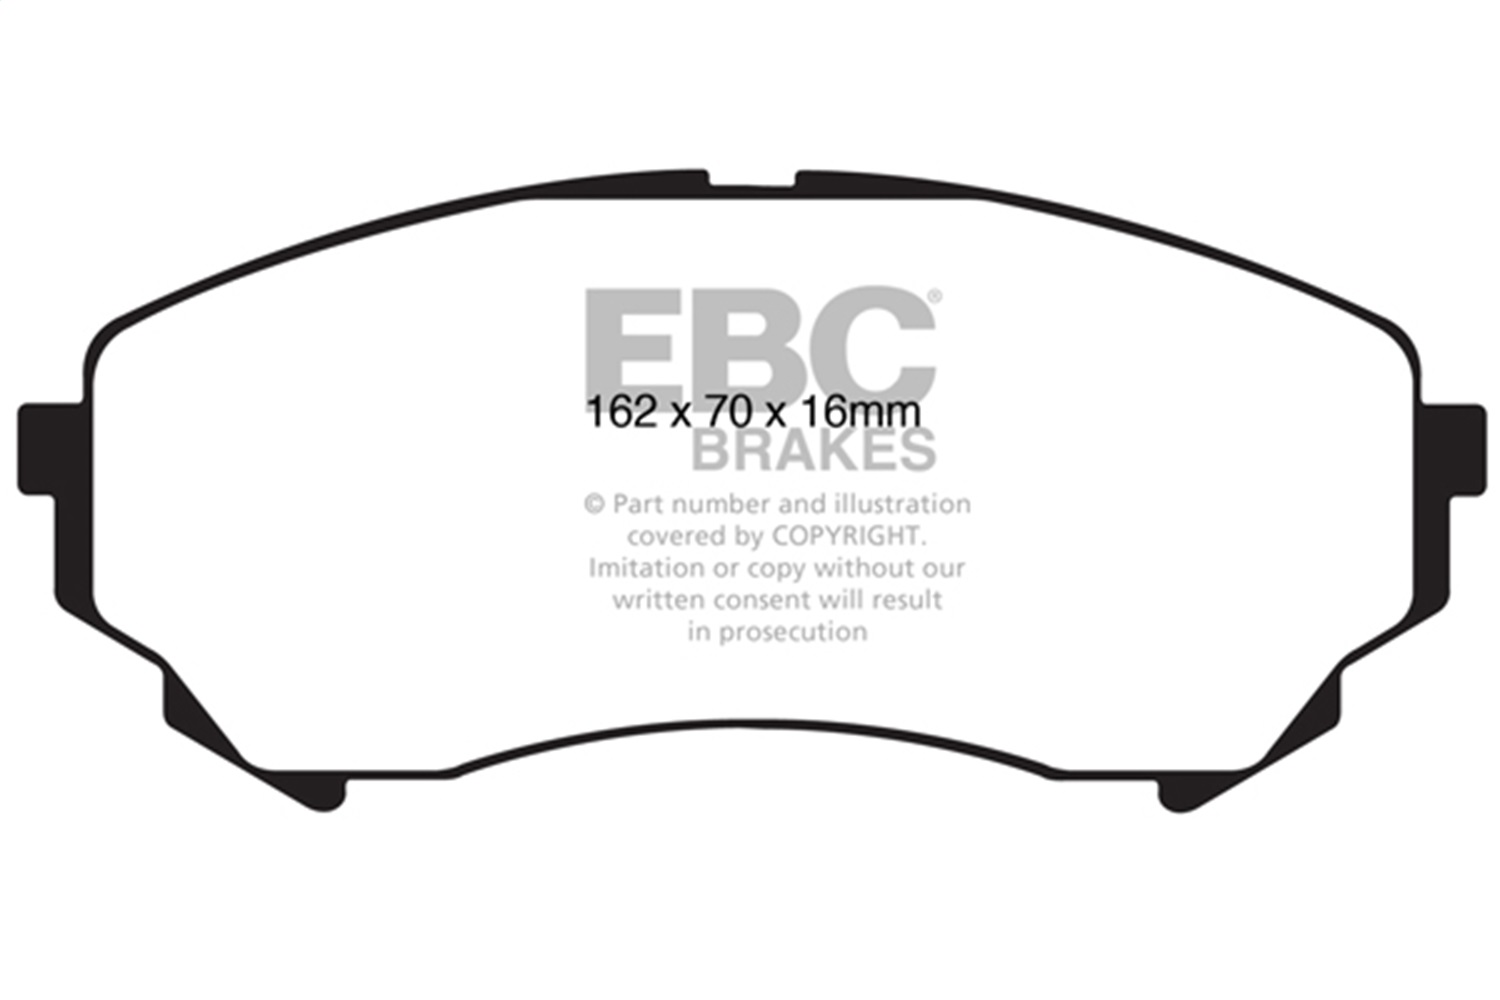 EBC Brakes UD1331 Ultimax  Brake Pads Fits 08-14 CTS